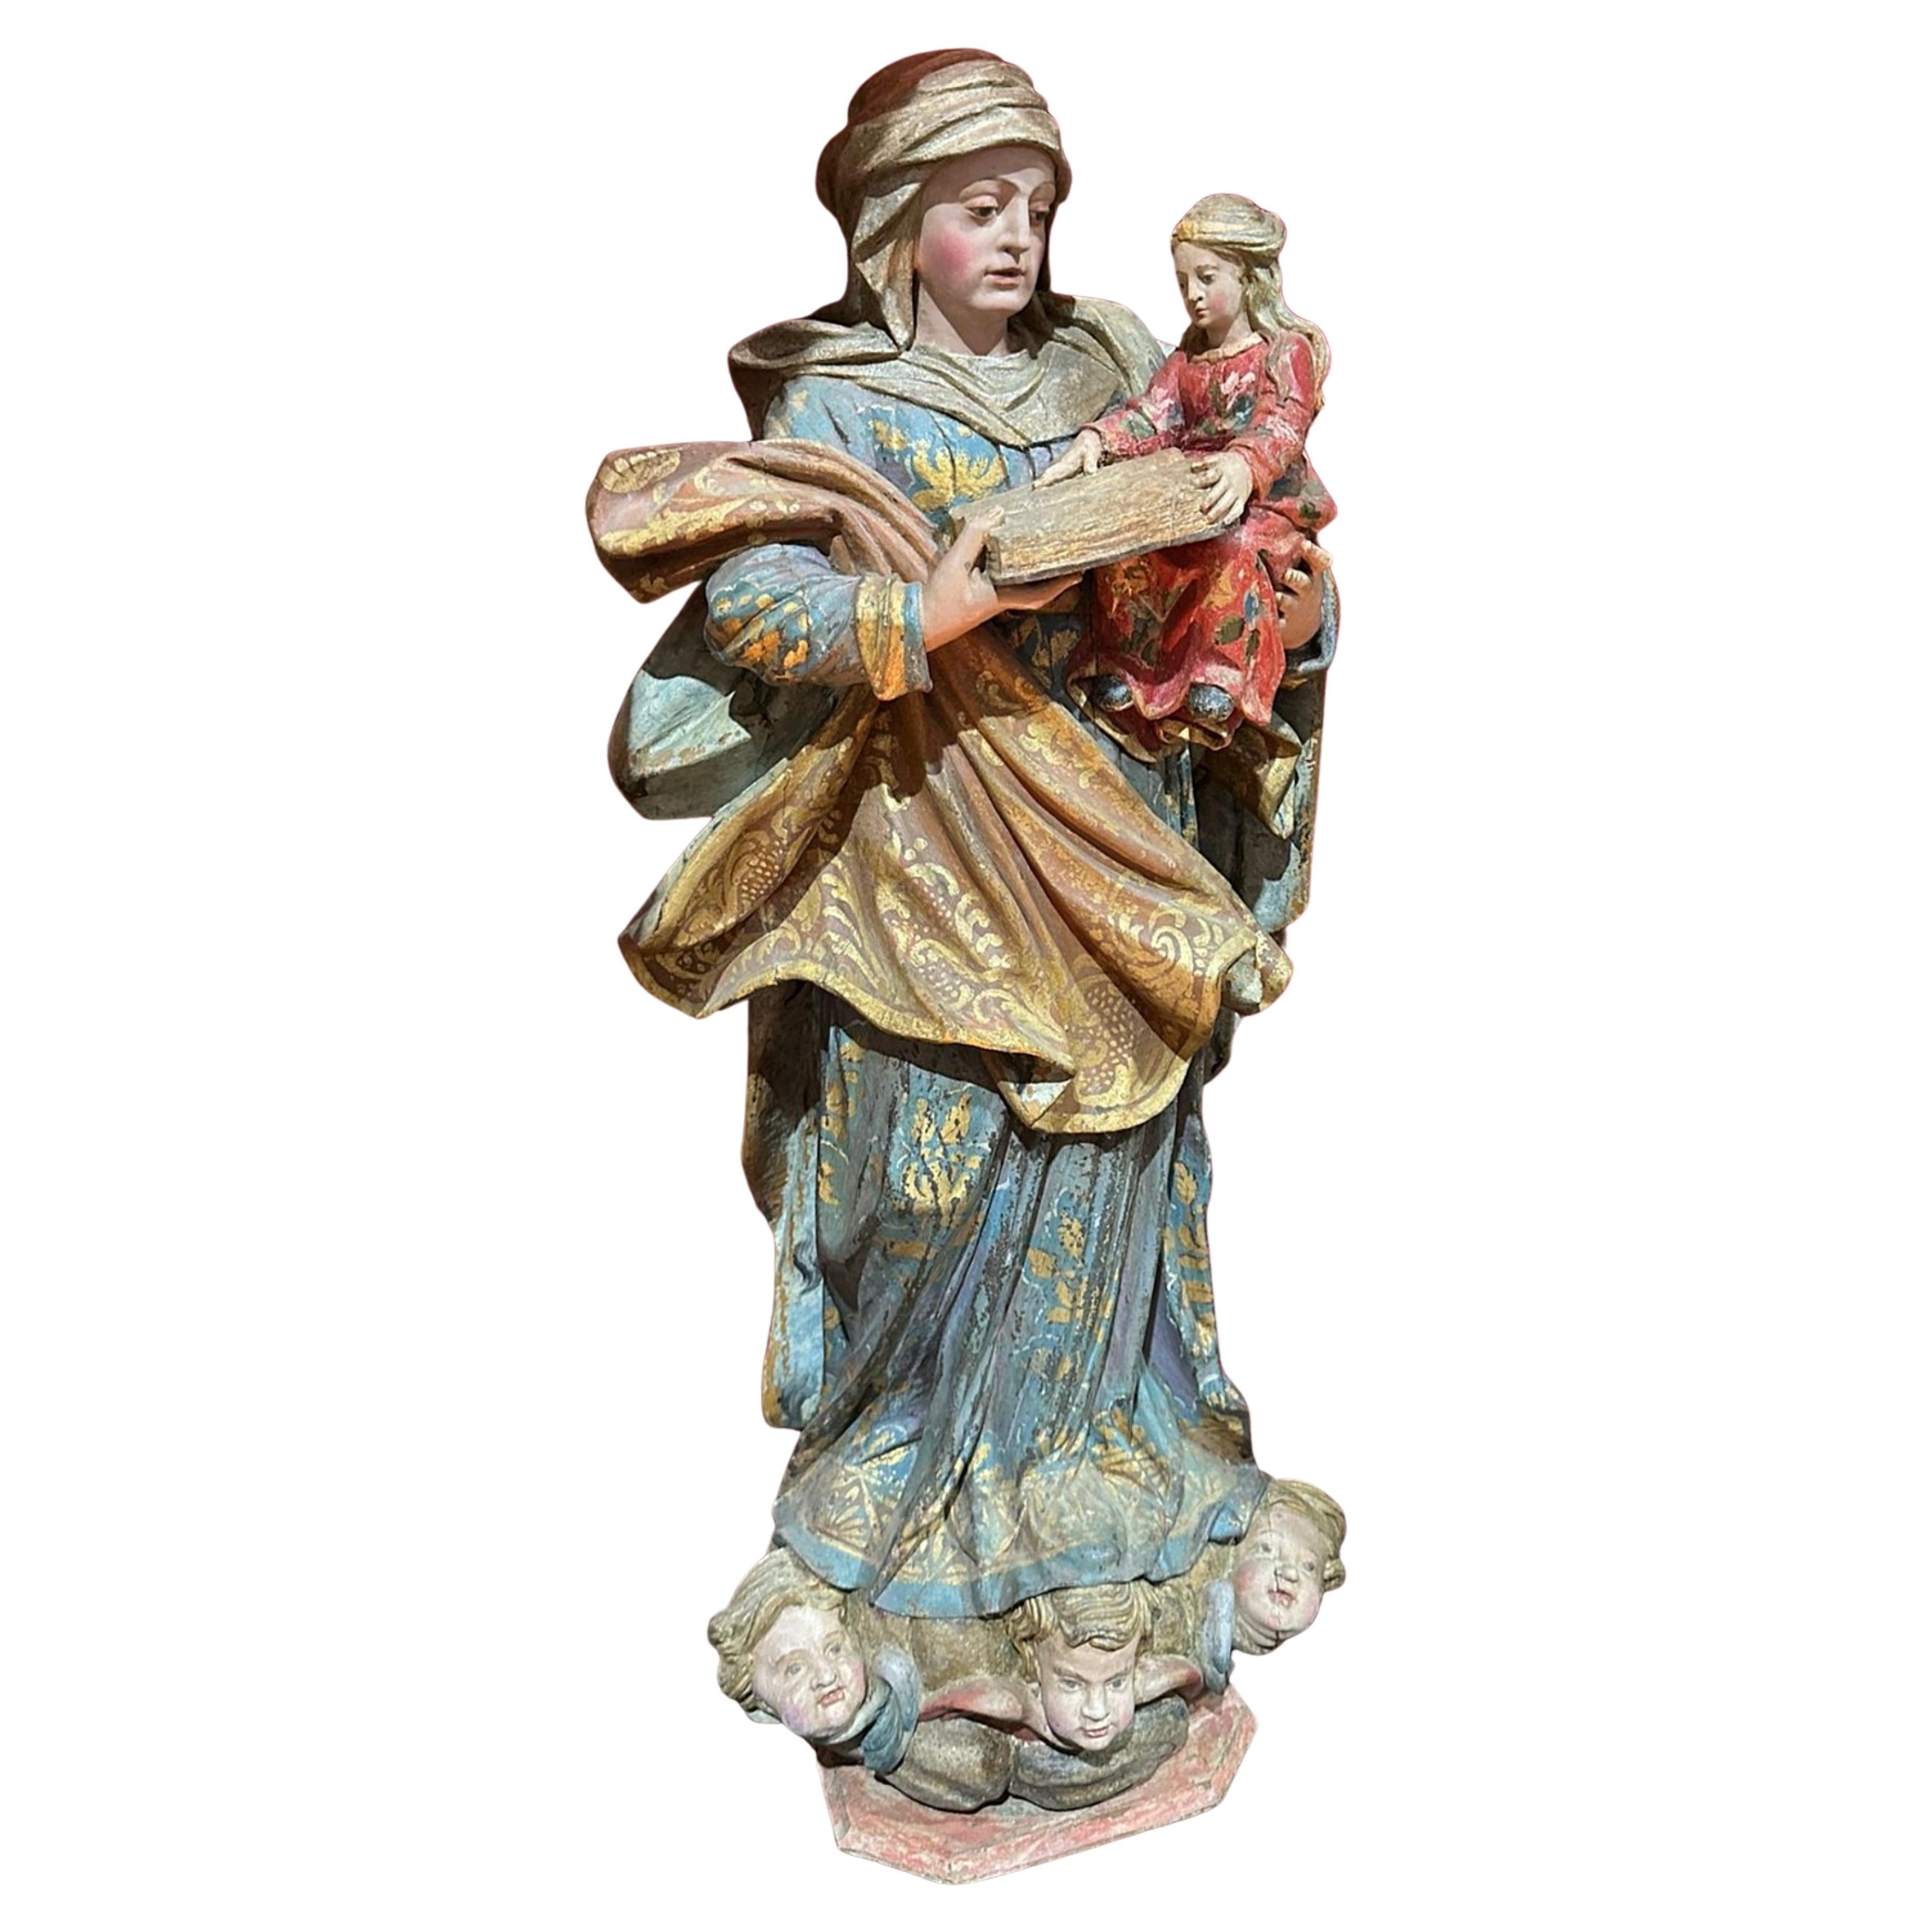 Important Portuguese Sculpture from the 17th Century, "Our Lady and Child Jesus" For Sale